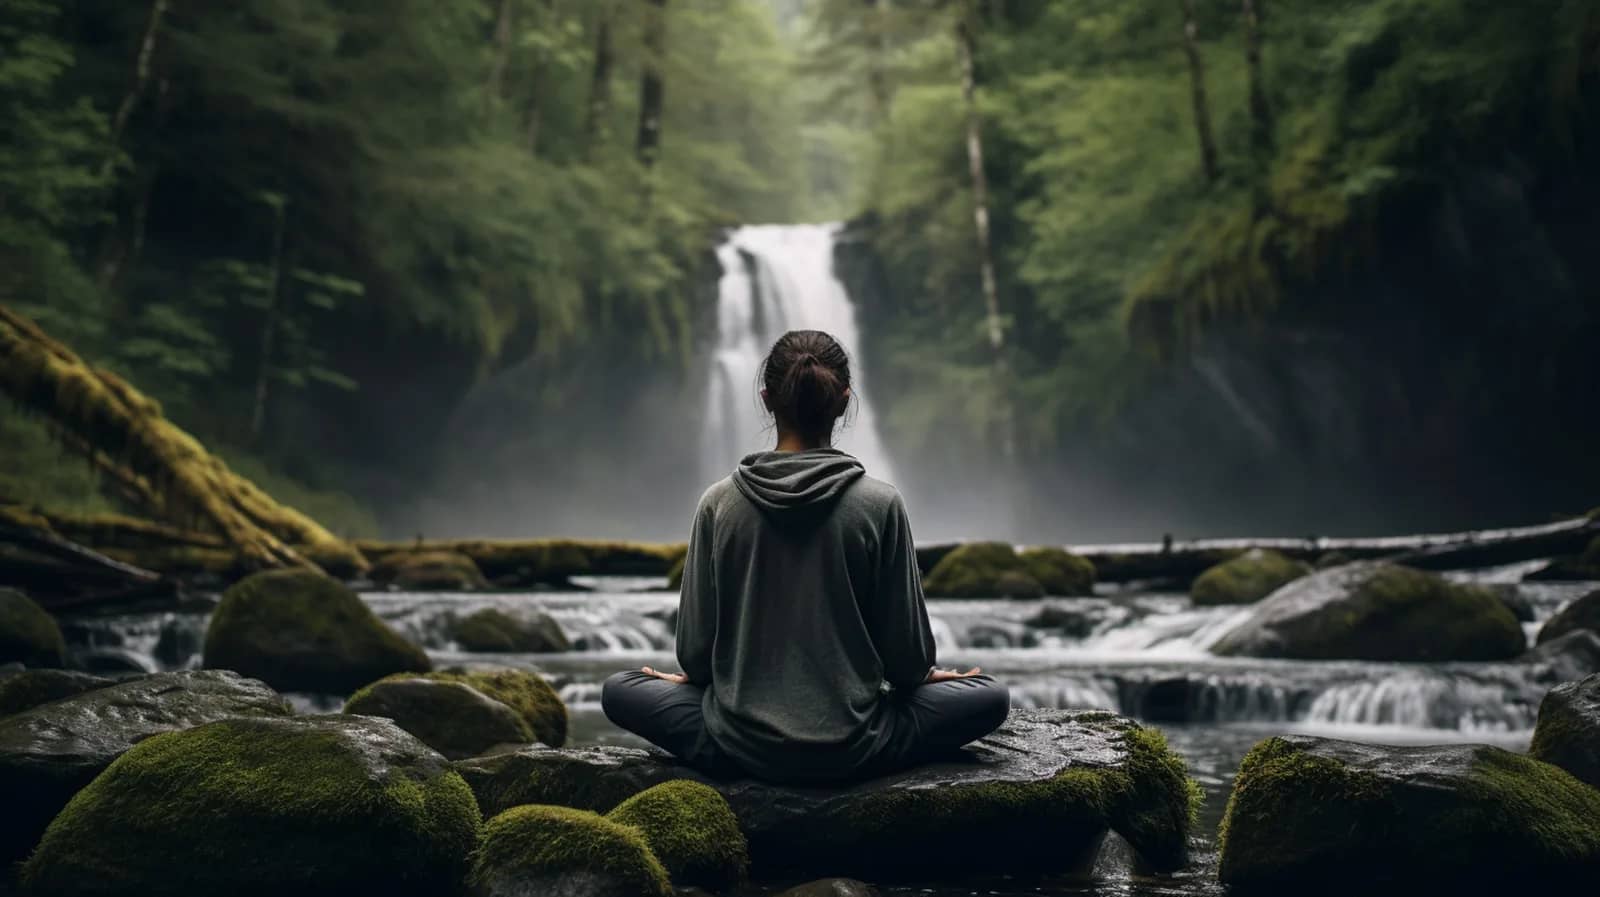 A photograph of someone meditating mindfully next to a small waterfall in nature